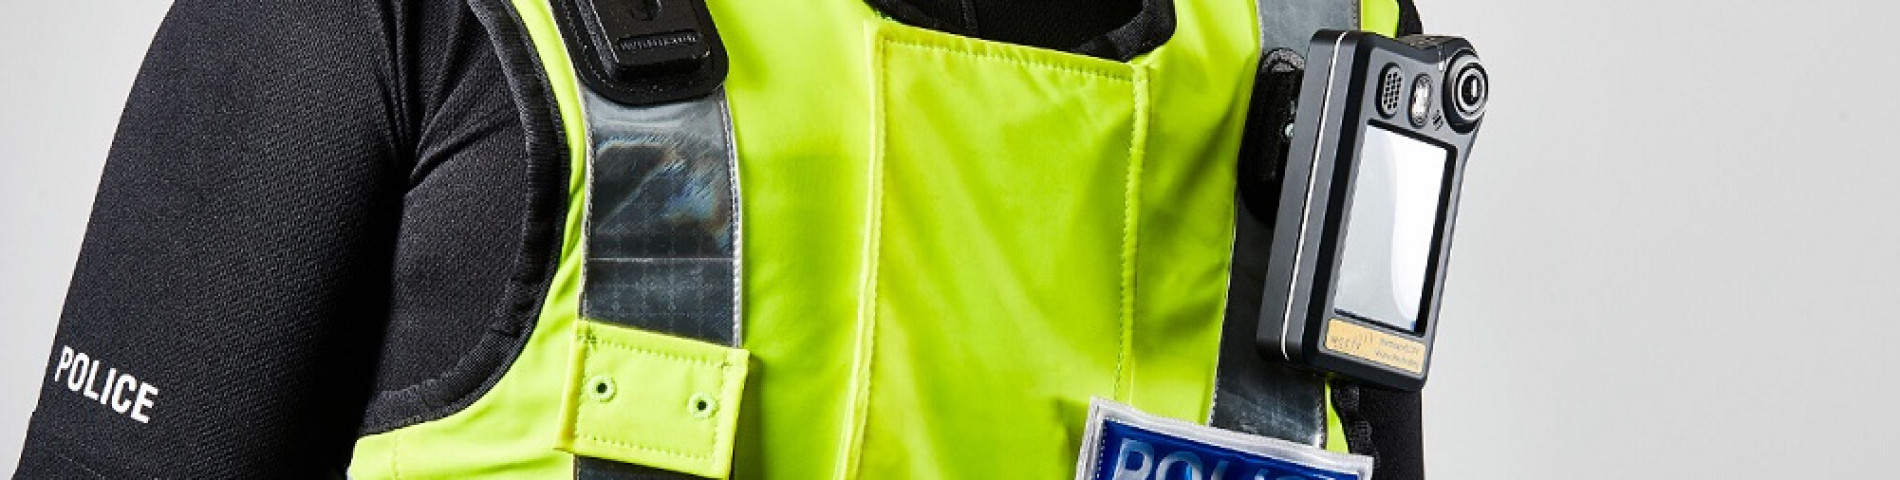 Body Worn Cameras for Police Forces Banner - WCCTV